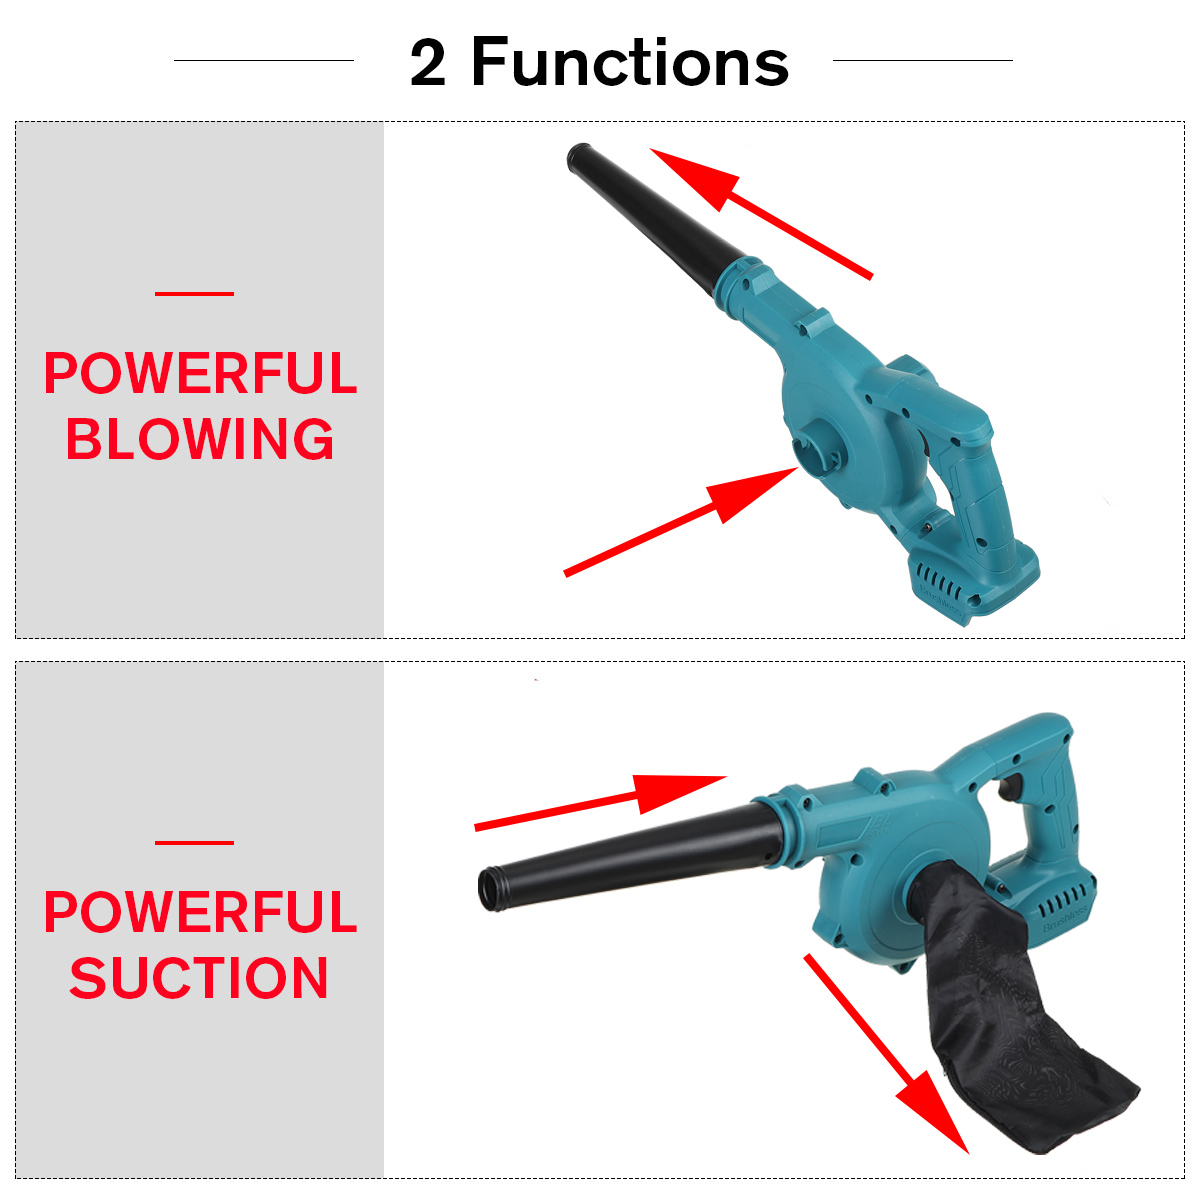 2-In-1-Brushless-Electric-Air-Blower--Vacuum-Suction-Dust-Cleaner-Leaf-Blower-For-Makita-18V-Battery-1860997-4